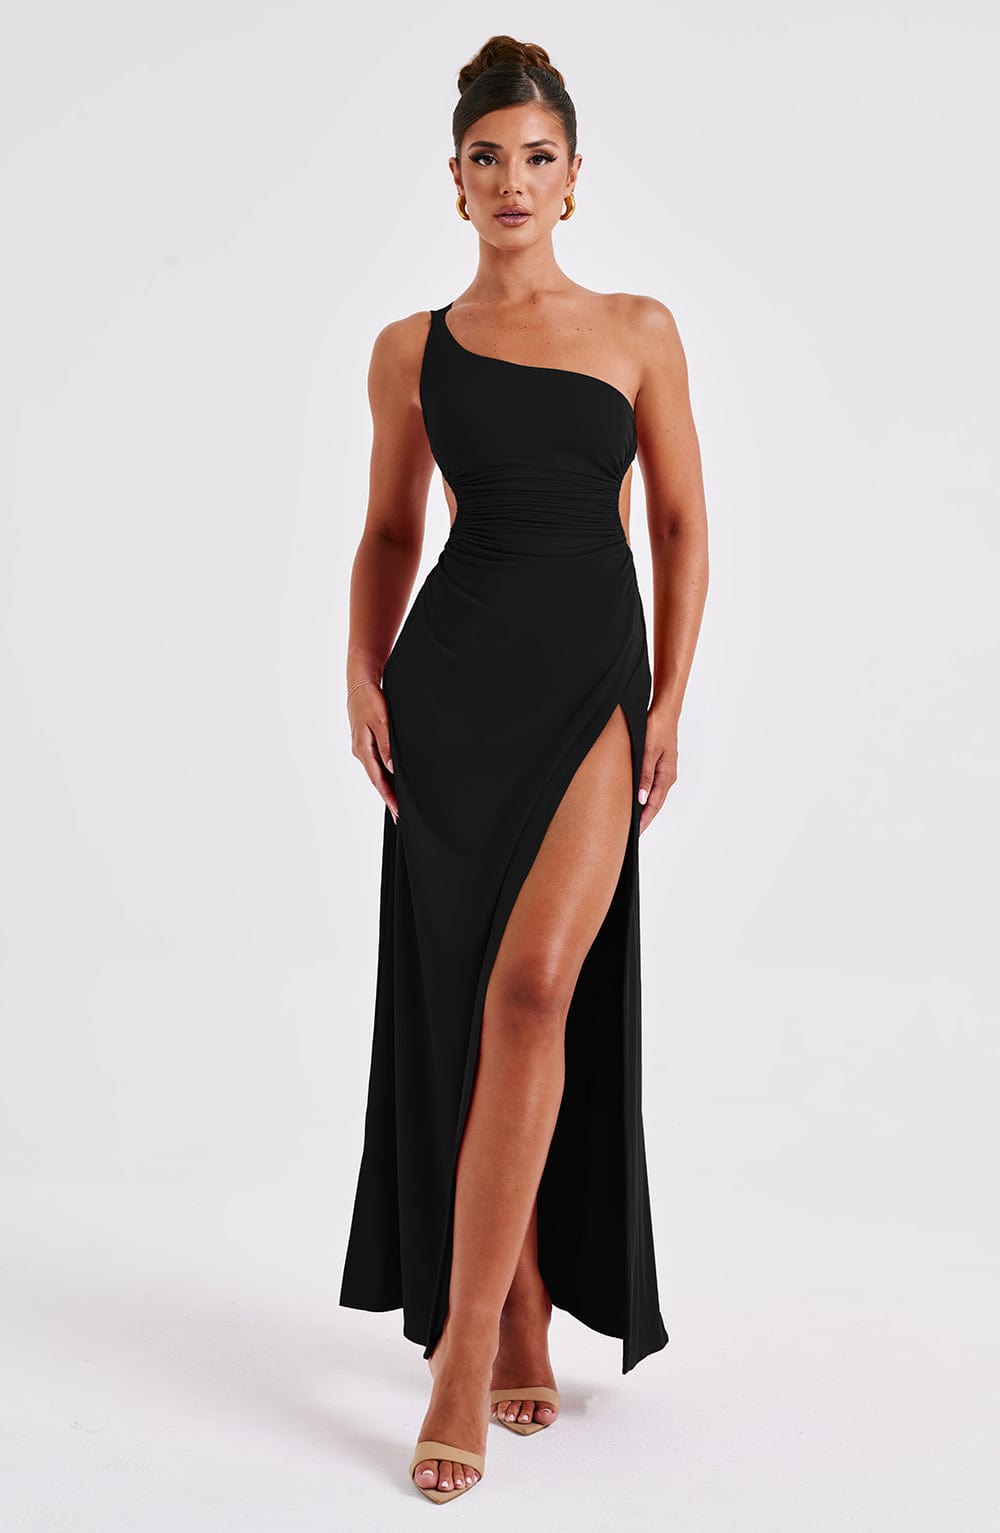 Get The Perfect Dress for Your Special Occasion at The Dress Outlet